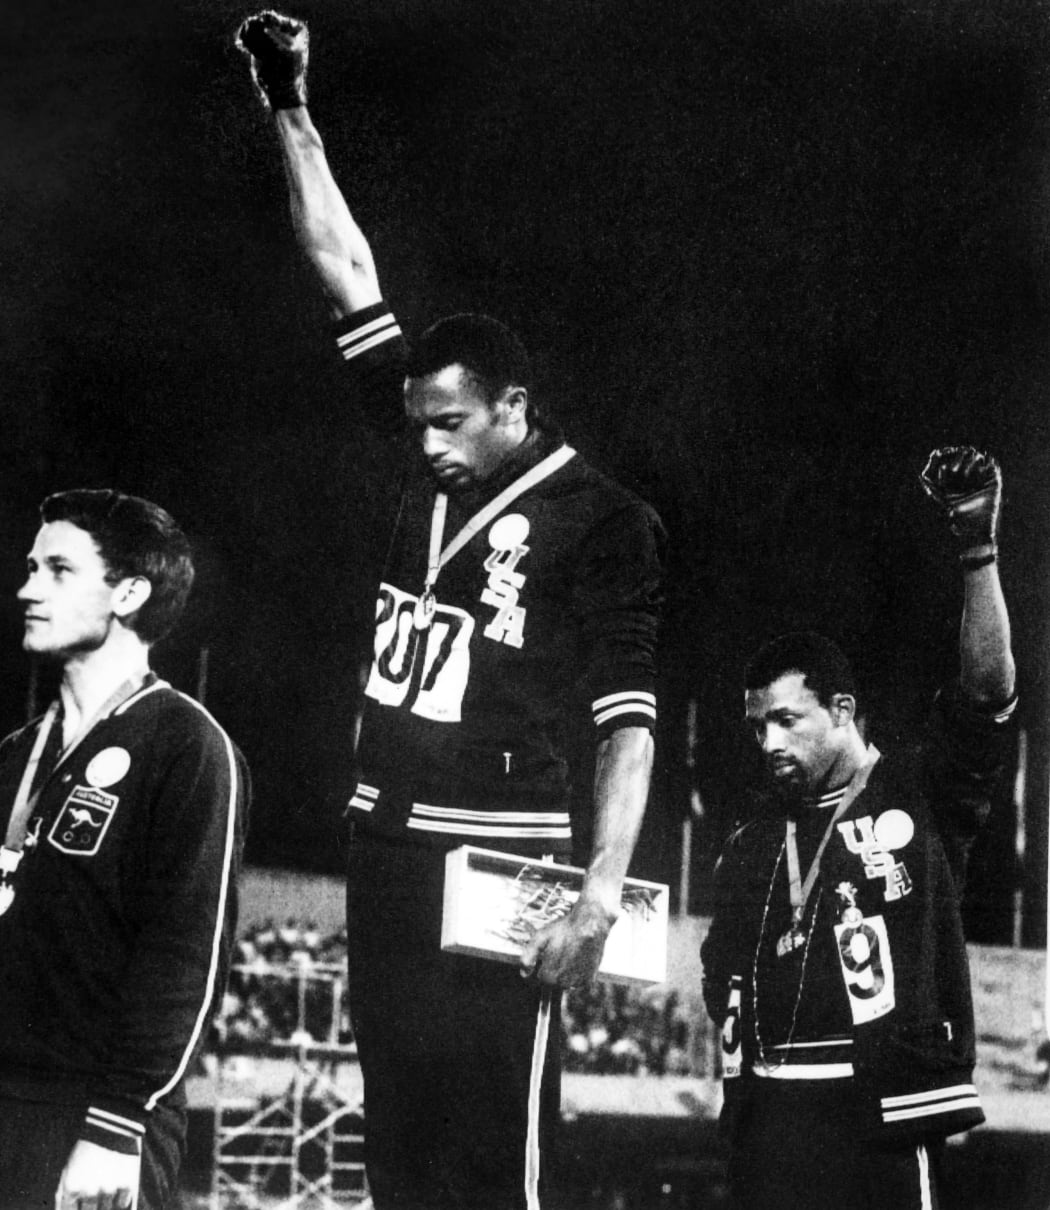 Tommie Smith (centre) and John Carlos (right) raise gloved fists in the Black Power salute to express their opposition to racism in the US after receiving medals for first and third place in the men's 200m at the 1968 Mexico Olympic. At left is Australian Peter Norman.